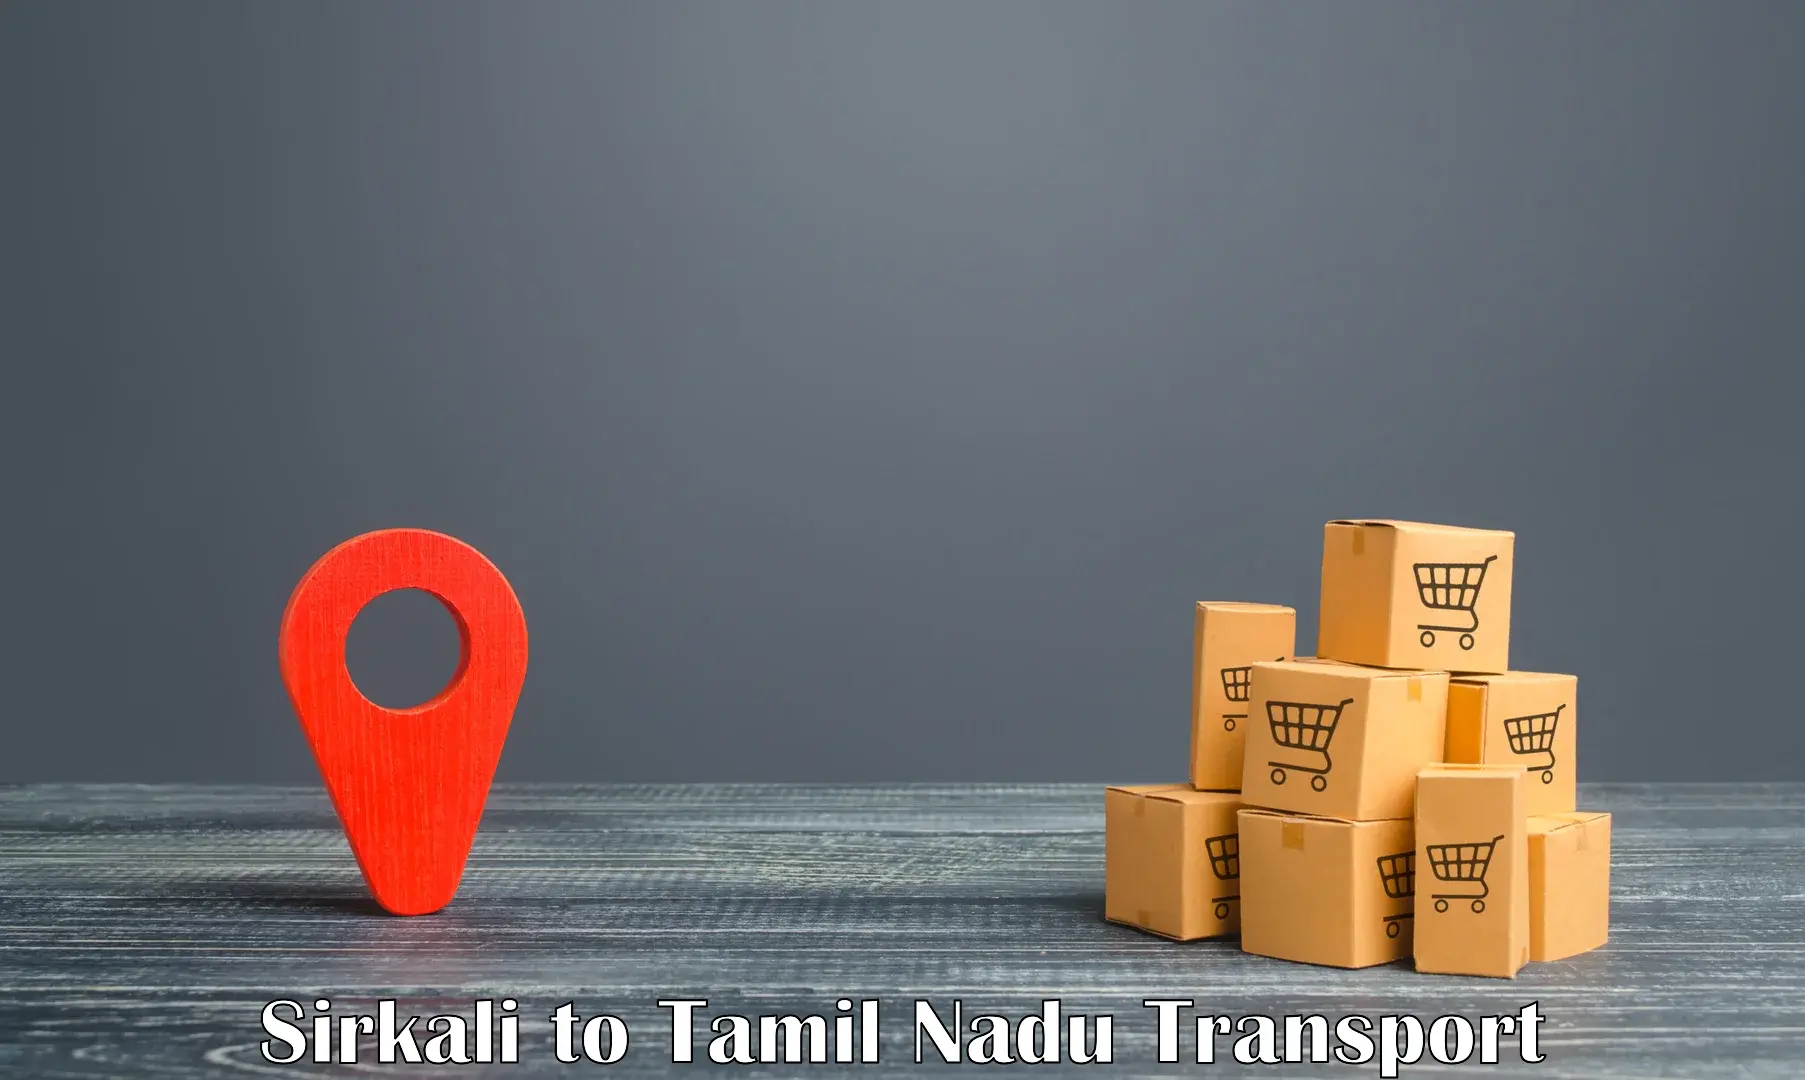 Express transport services Sirkali to Ennore Port Chennai